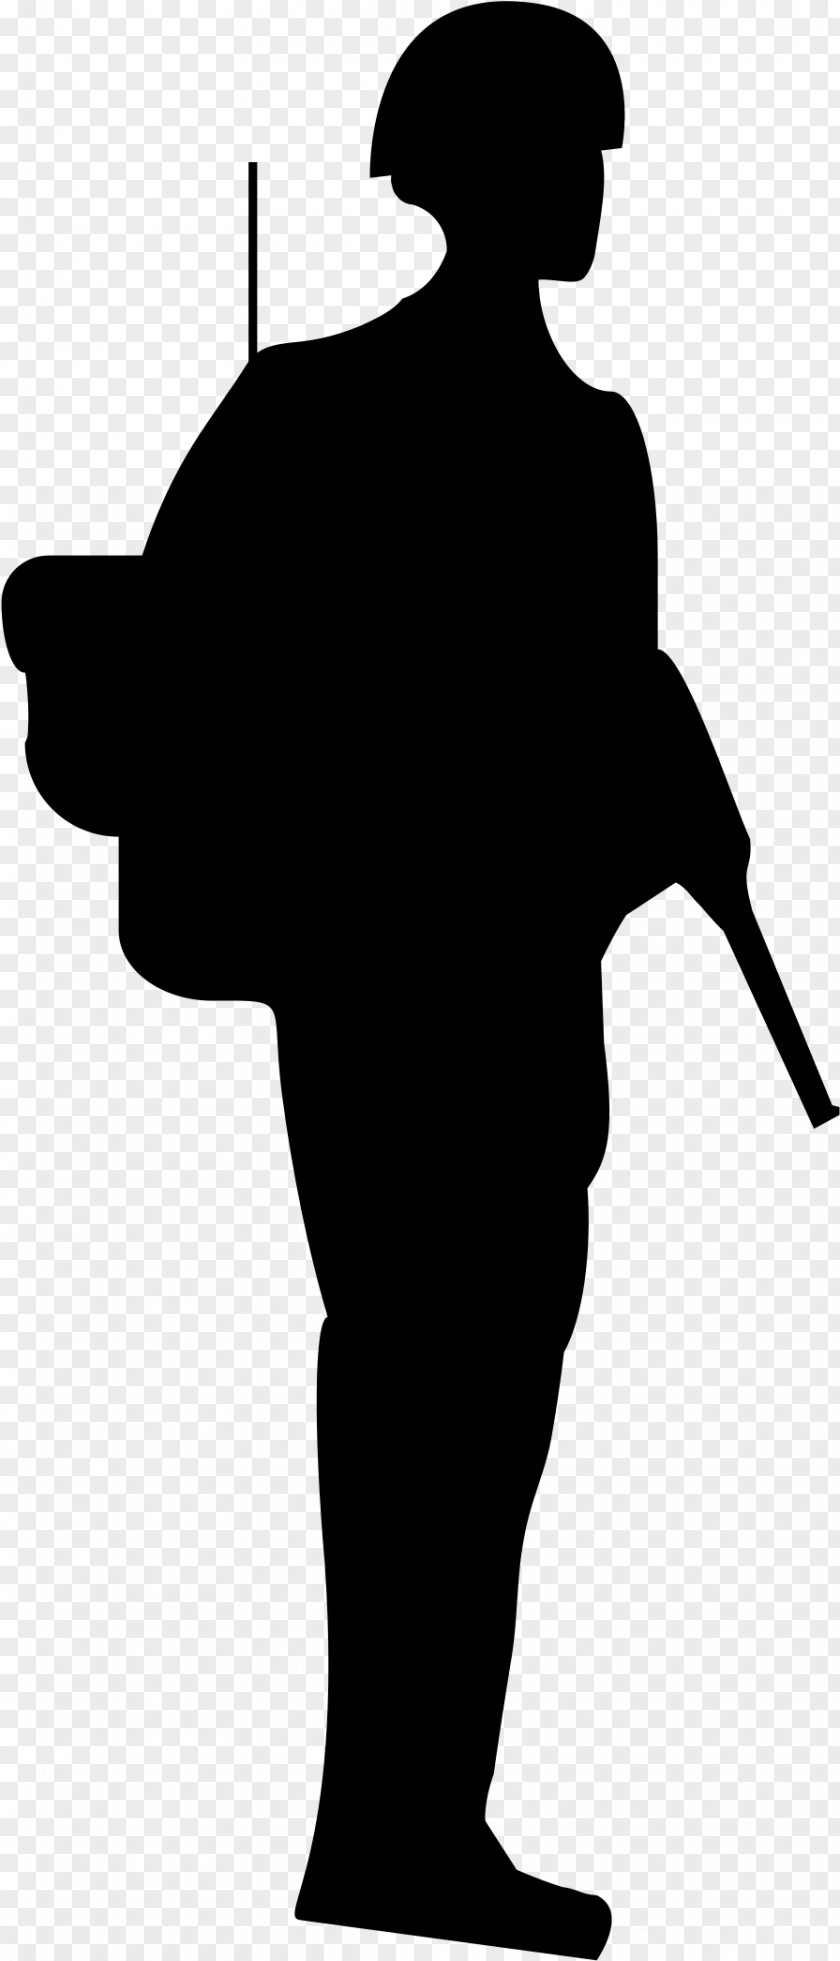 Blackandwhite Salute Soldier Silhouette PNG